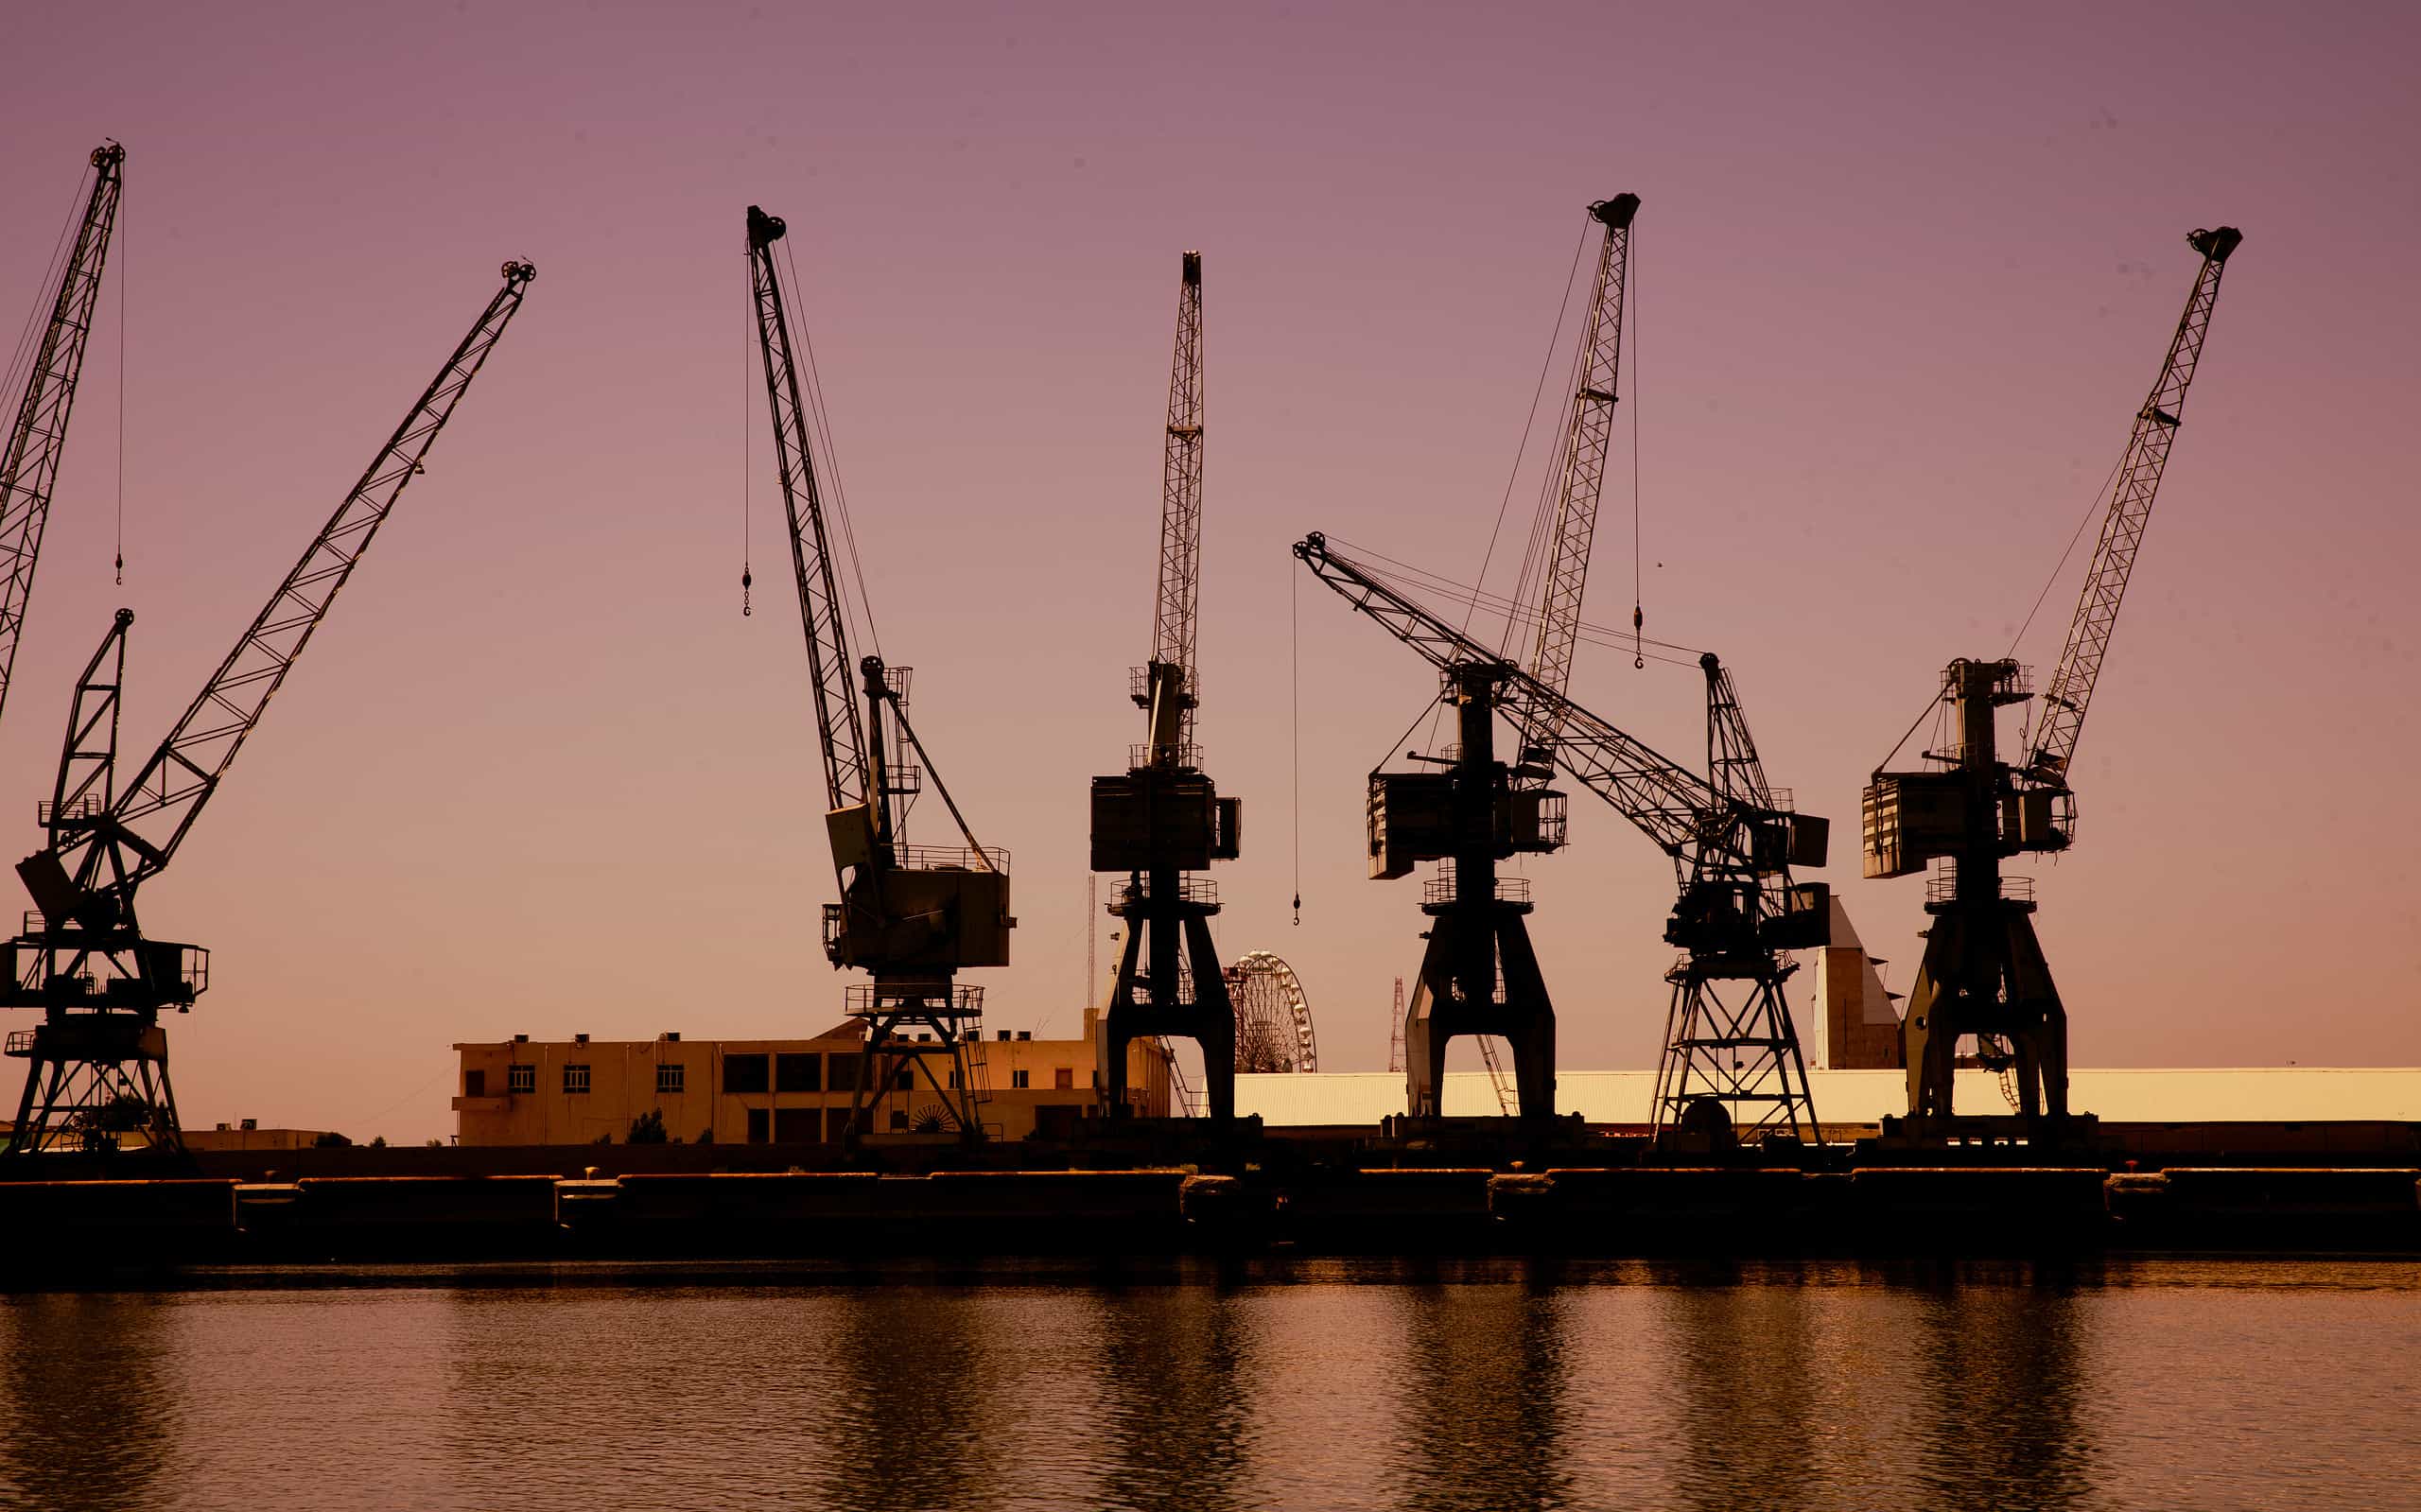 Sunset on the river Tigris with Cranes